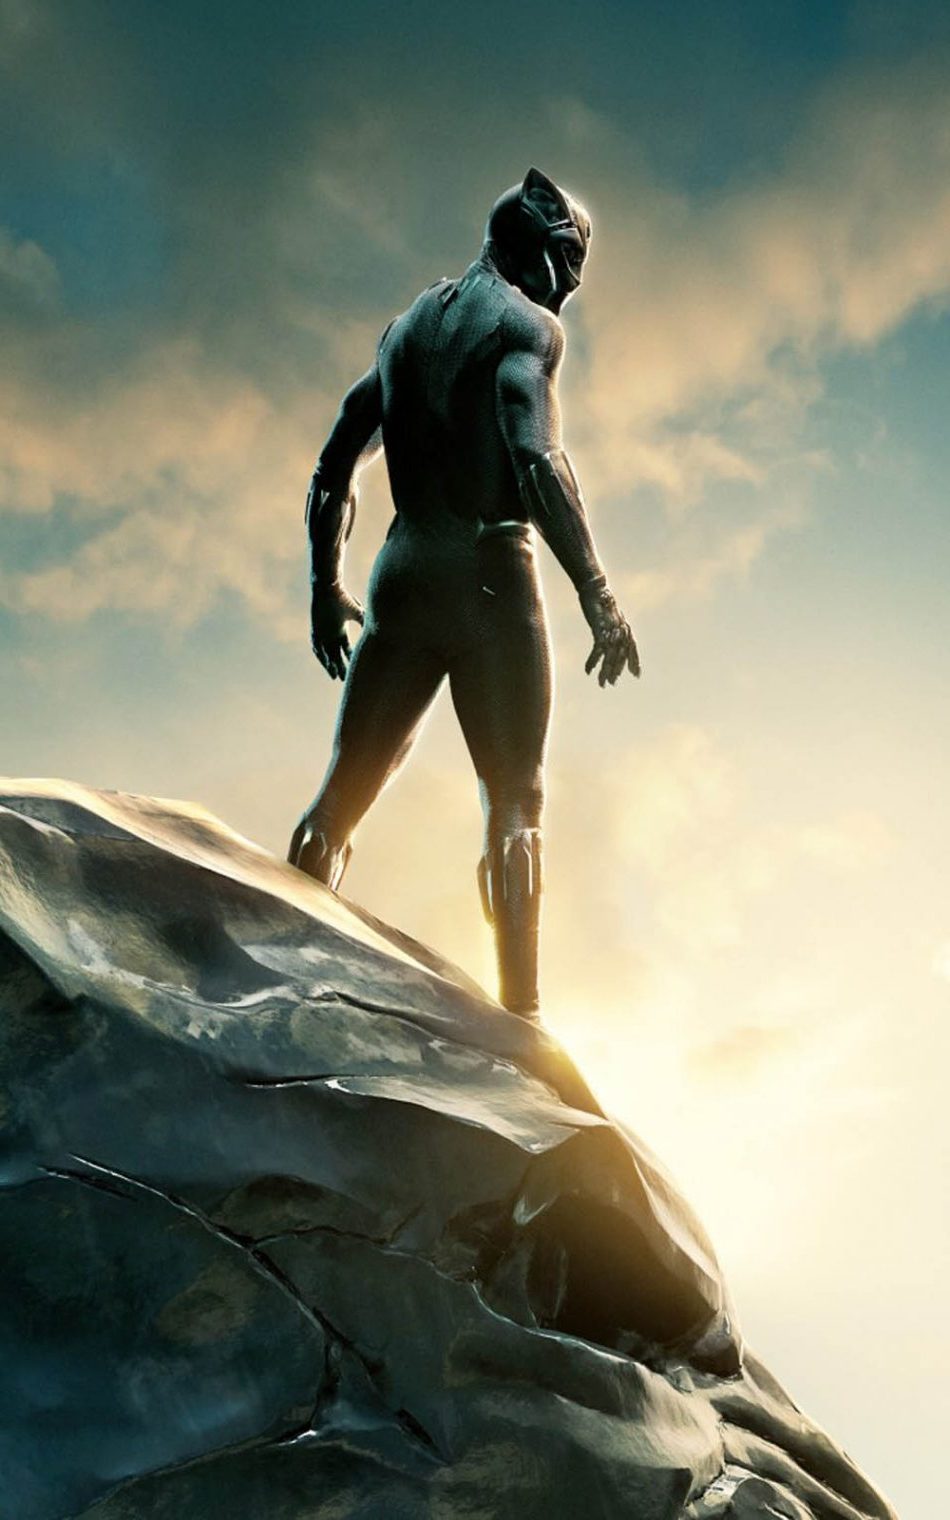 panther iphone wallpaper,surfing,fictional character,recreation,superhero